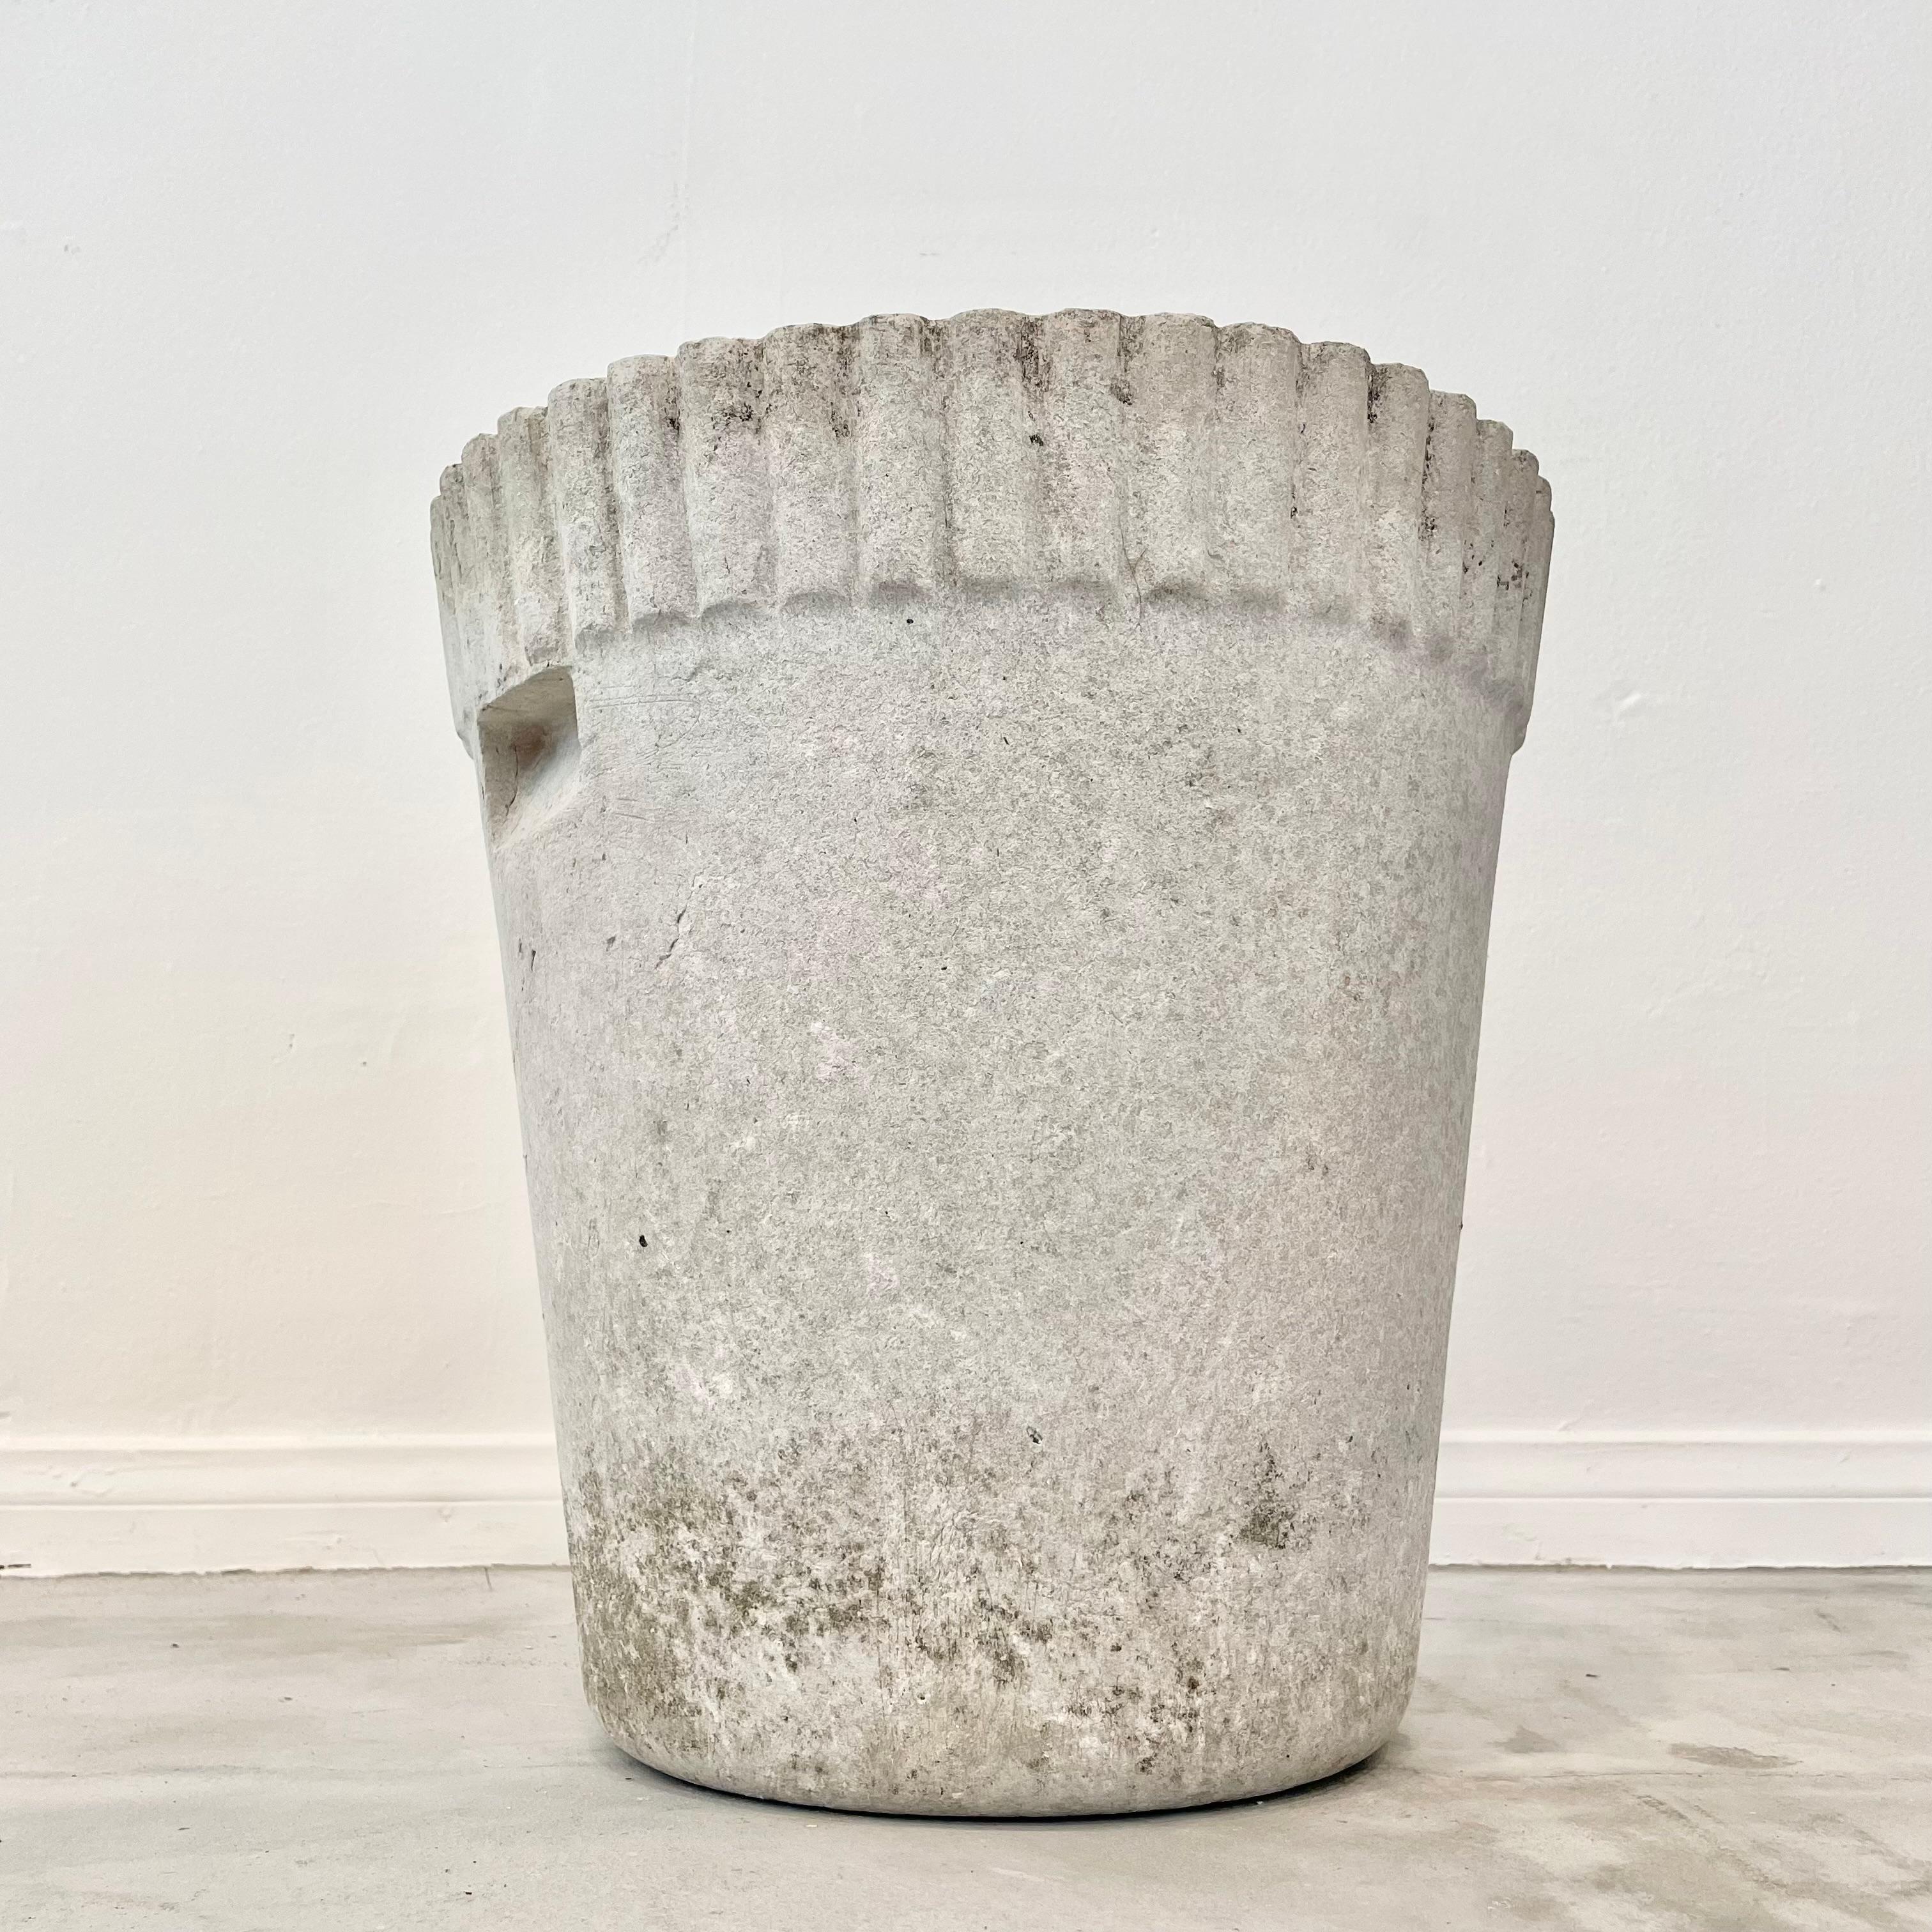 Beautiful concrete flower pot by Willy Guhl. A natural grey concrete finish with minimal wear, this planter fits perfectly into any design story. Made in Switzerland in the 1970s, this planter has a smooth body that gently tapers down towards the